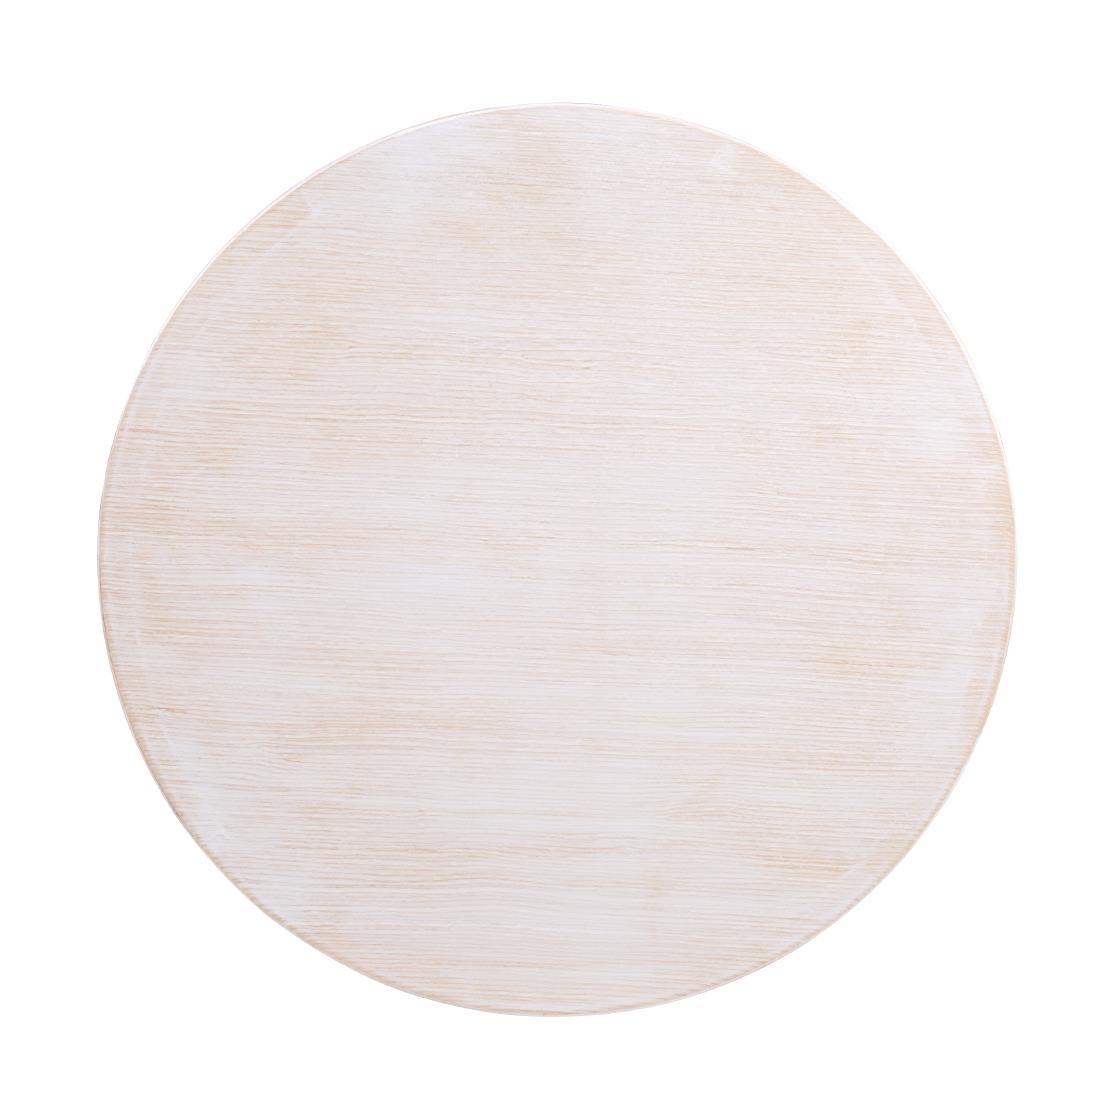 Bolero Pre-drilled Round Table Top Vintage White 600mm - DY729  - 1